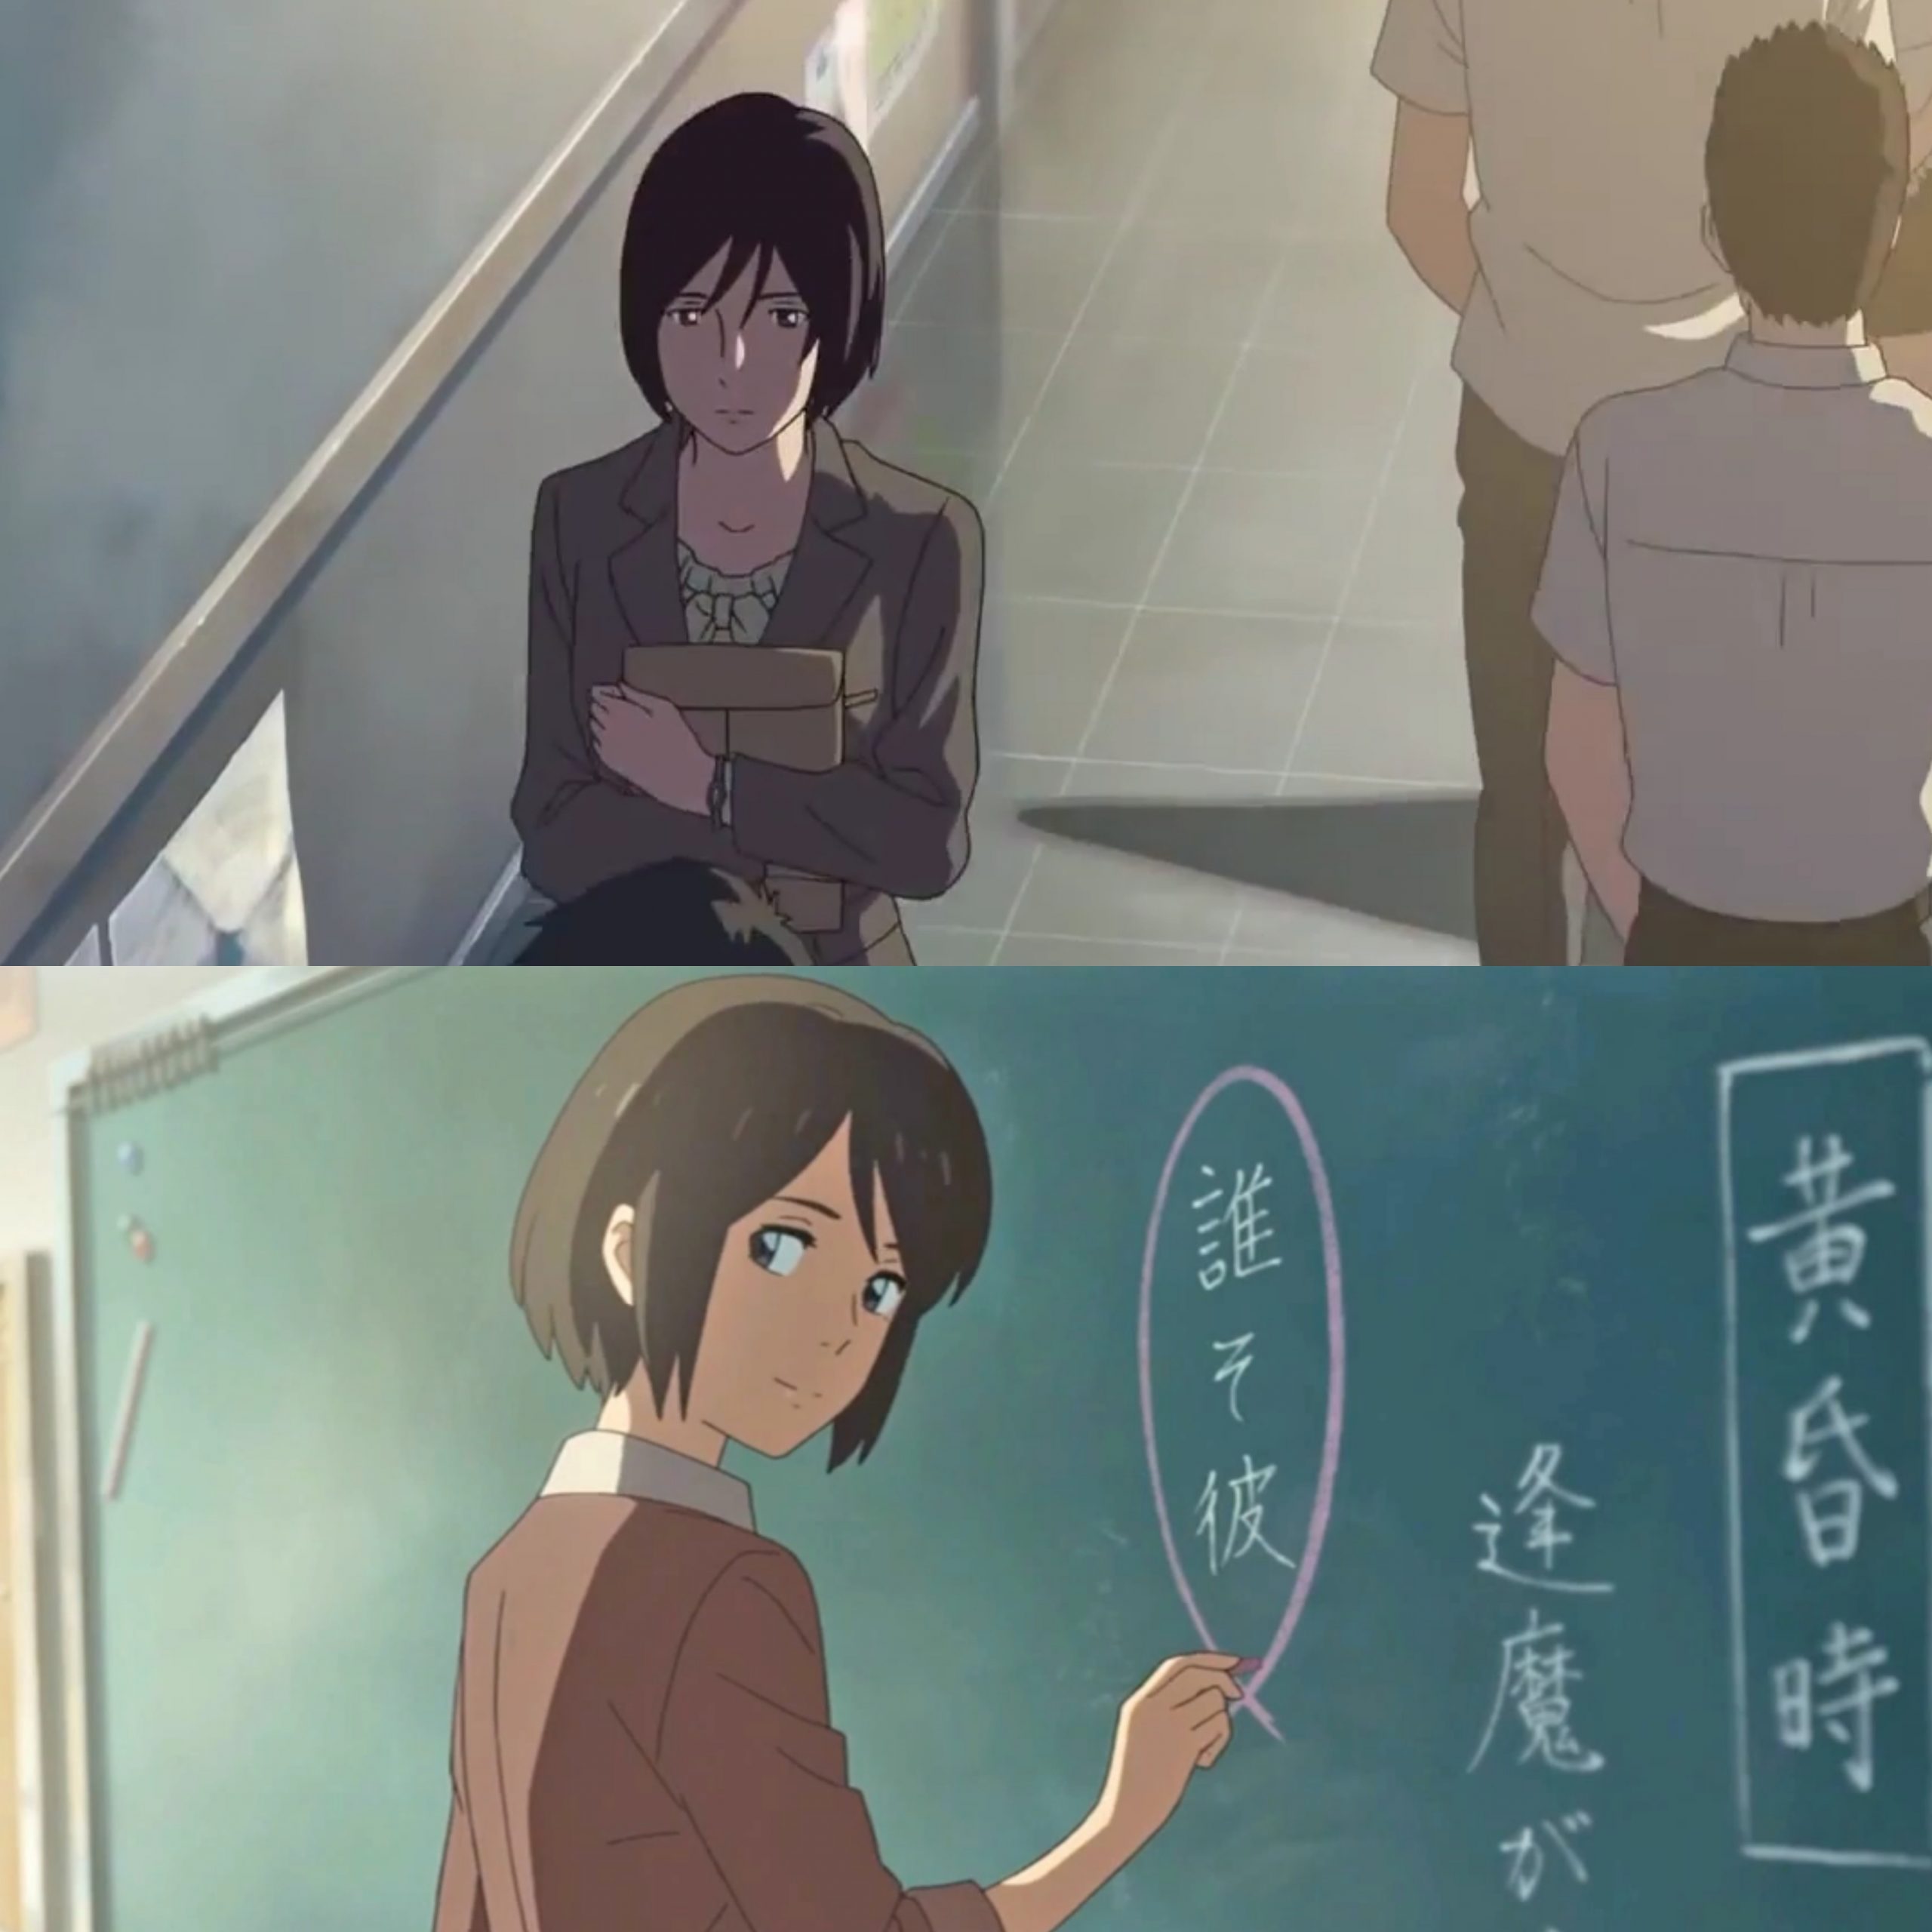 The Connection Between The Garden Of Words Your Name And Weathering With You Explained Otakukart